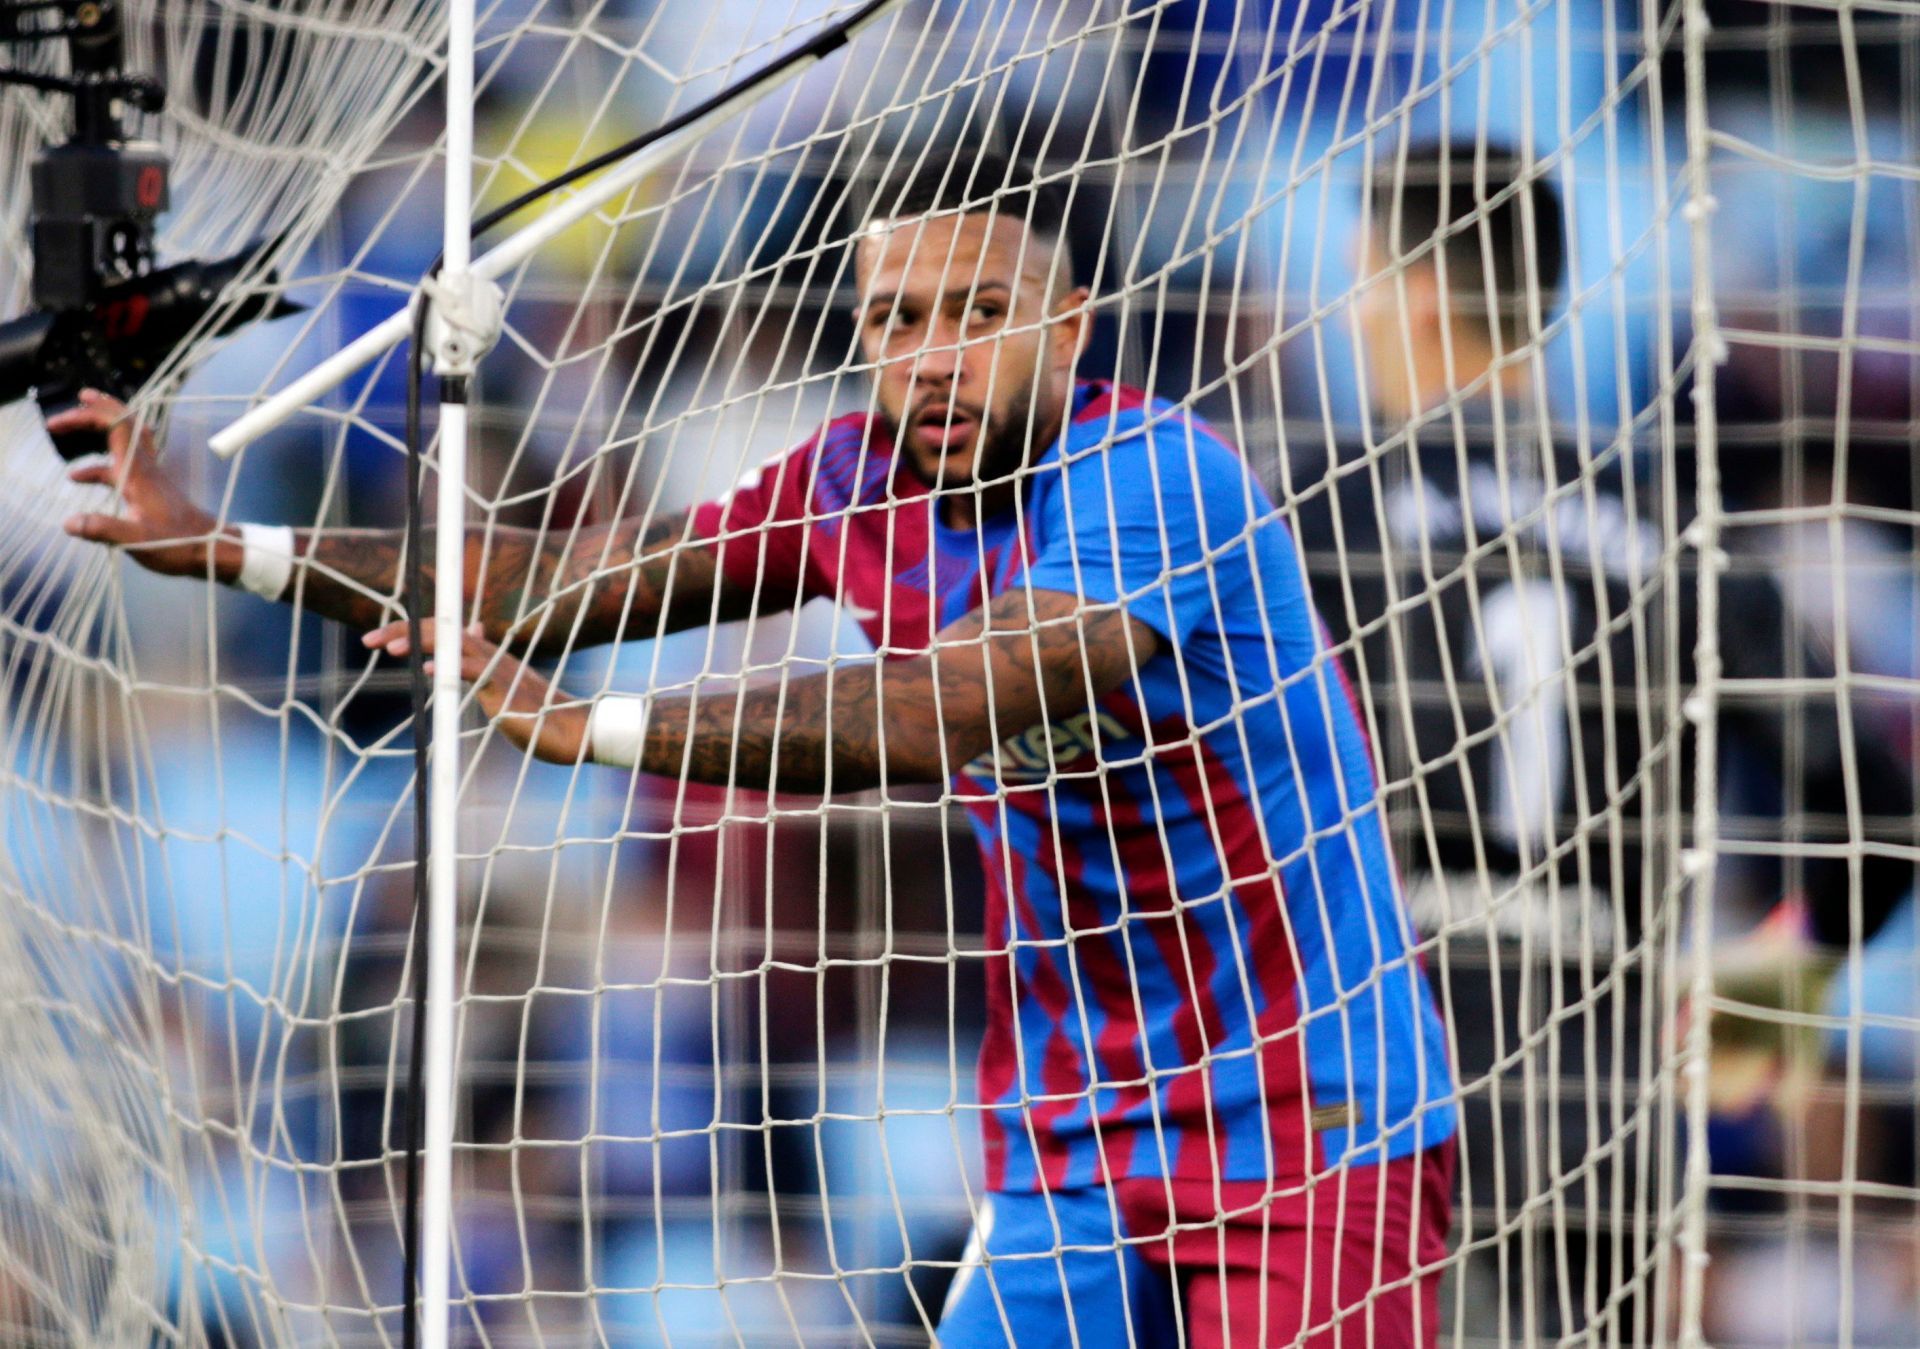 Barcelona have dropped to ninth in La Liga after drawing with Celta Vigo.